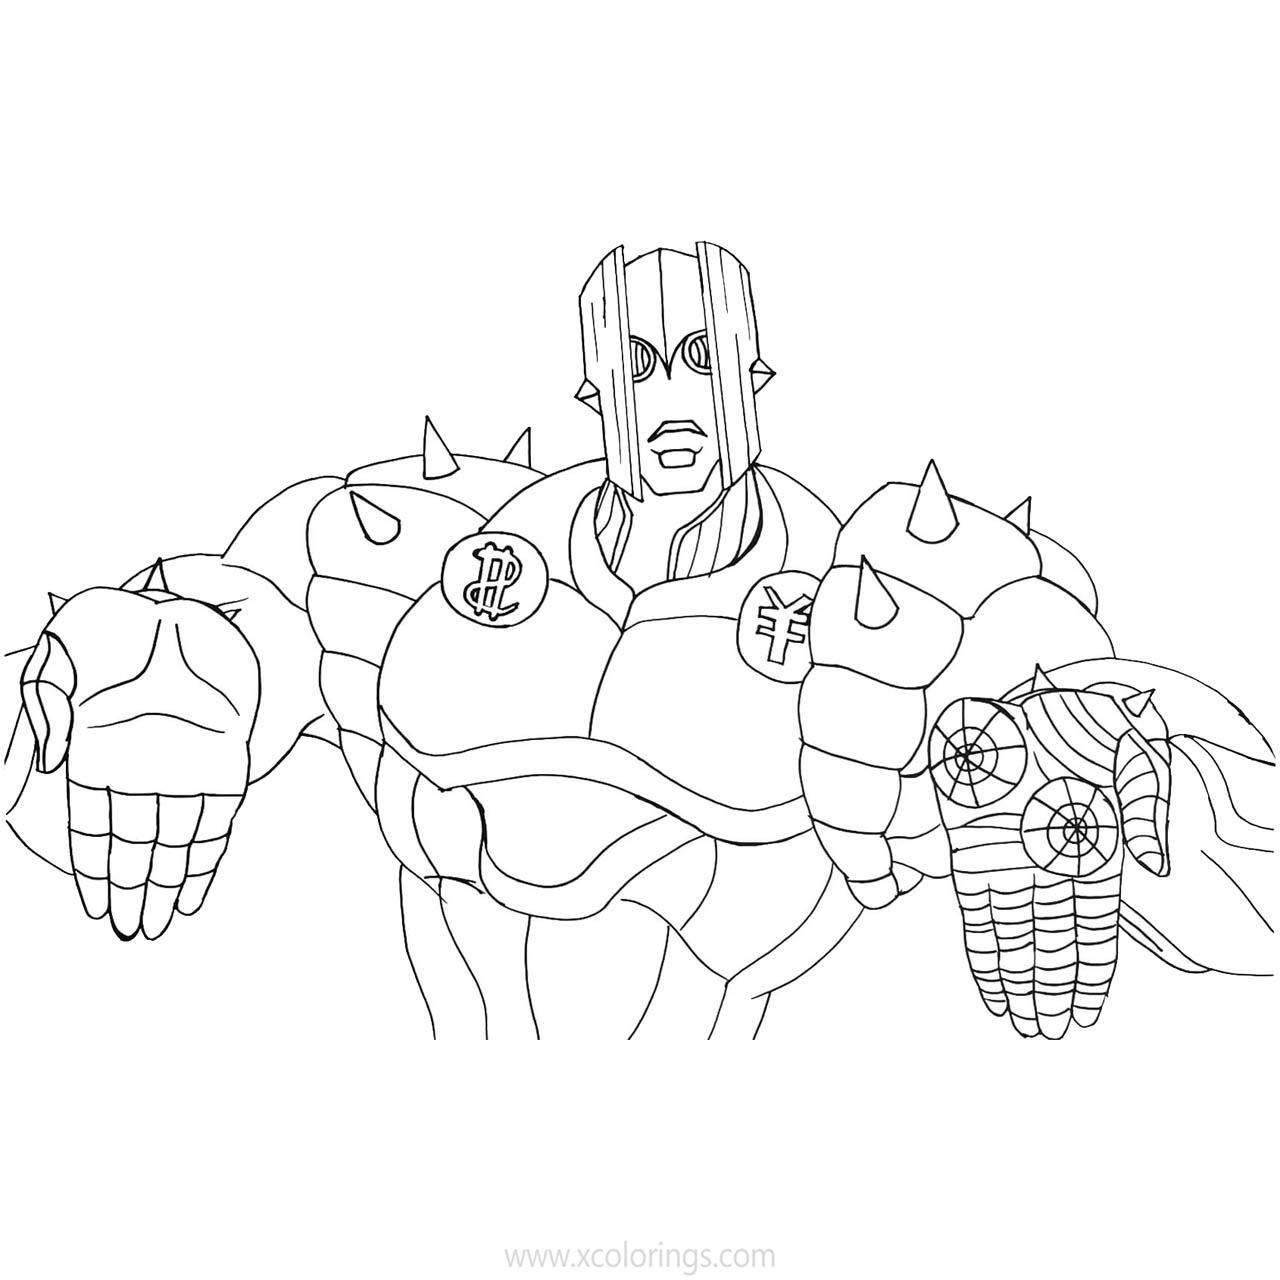 Free JoJo's Bizarre Adventure Coloring Pages The Hand printable